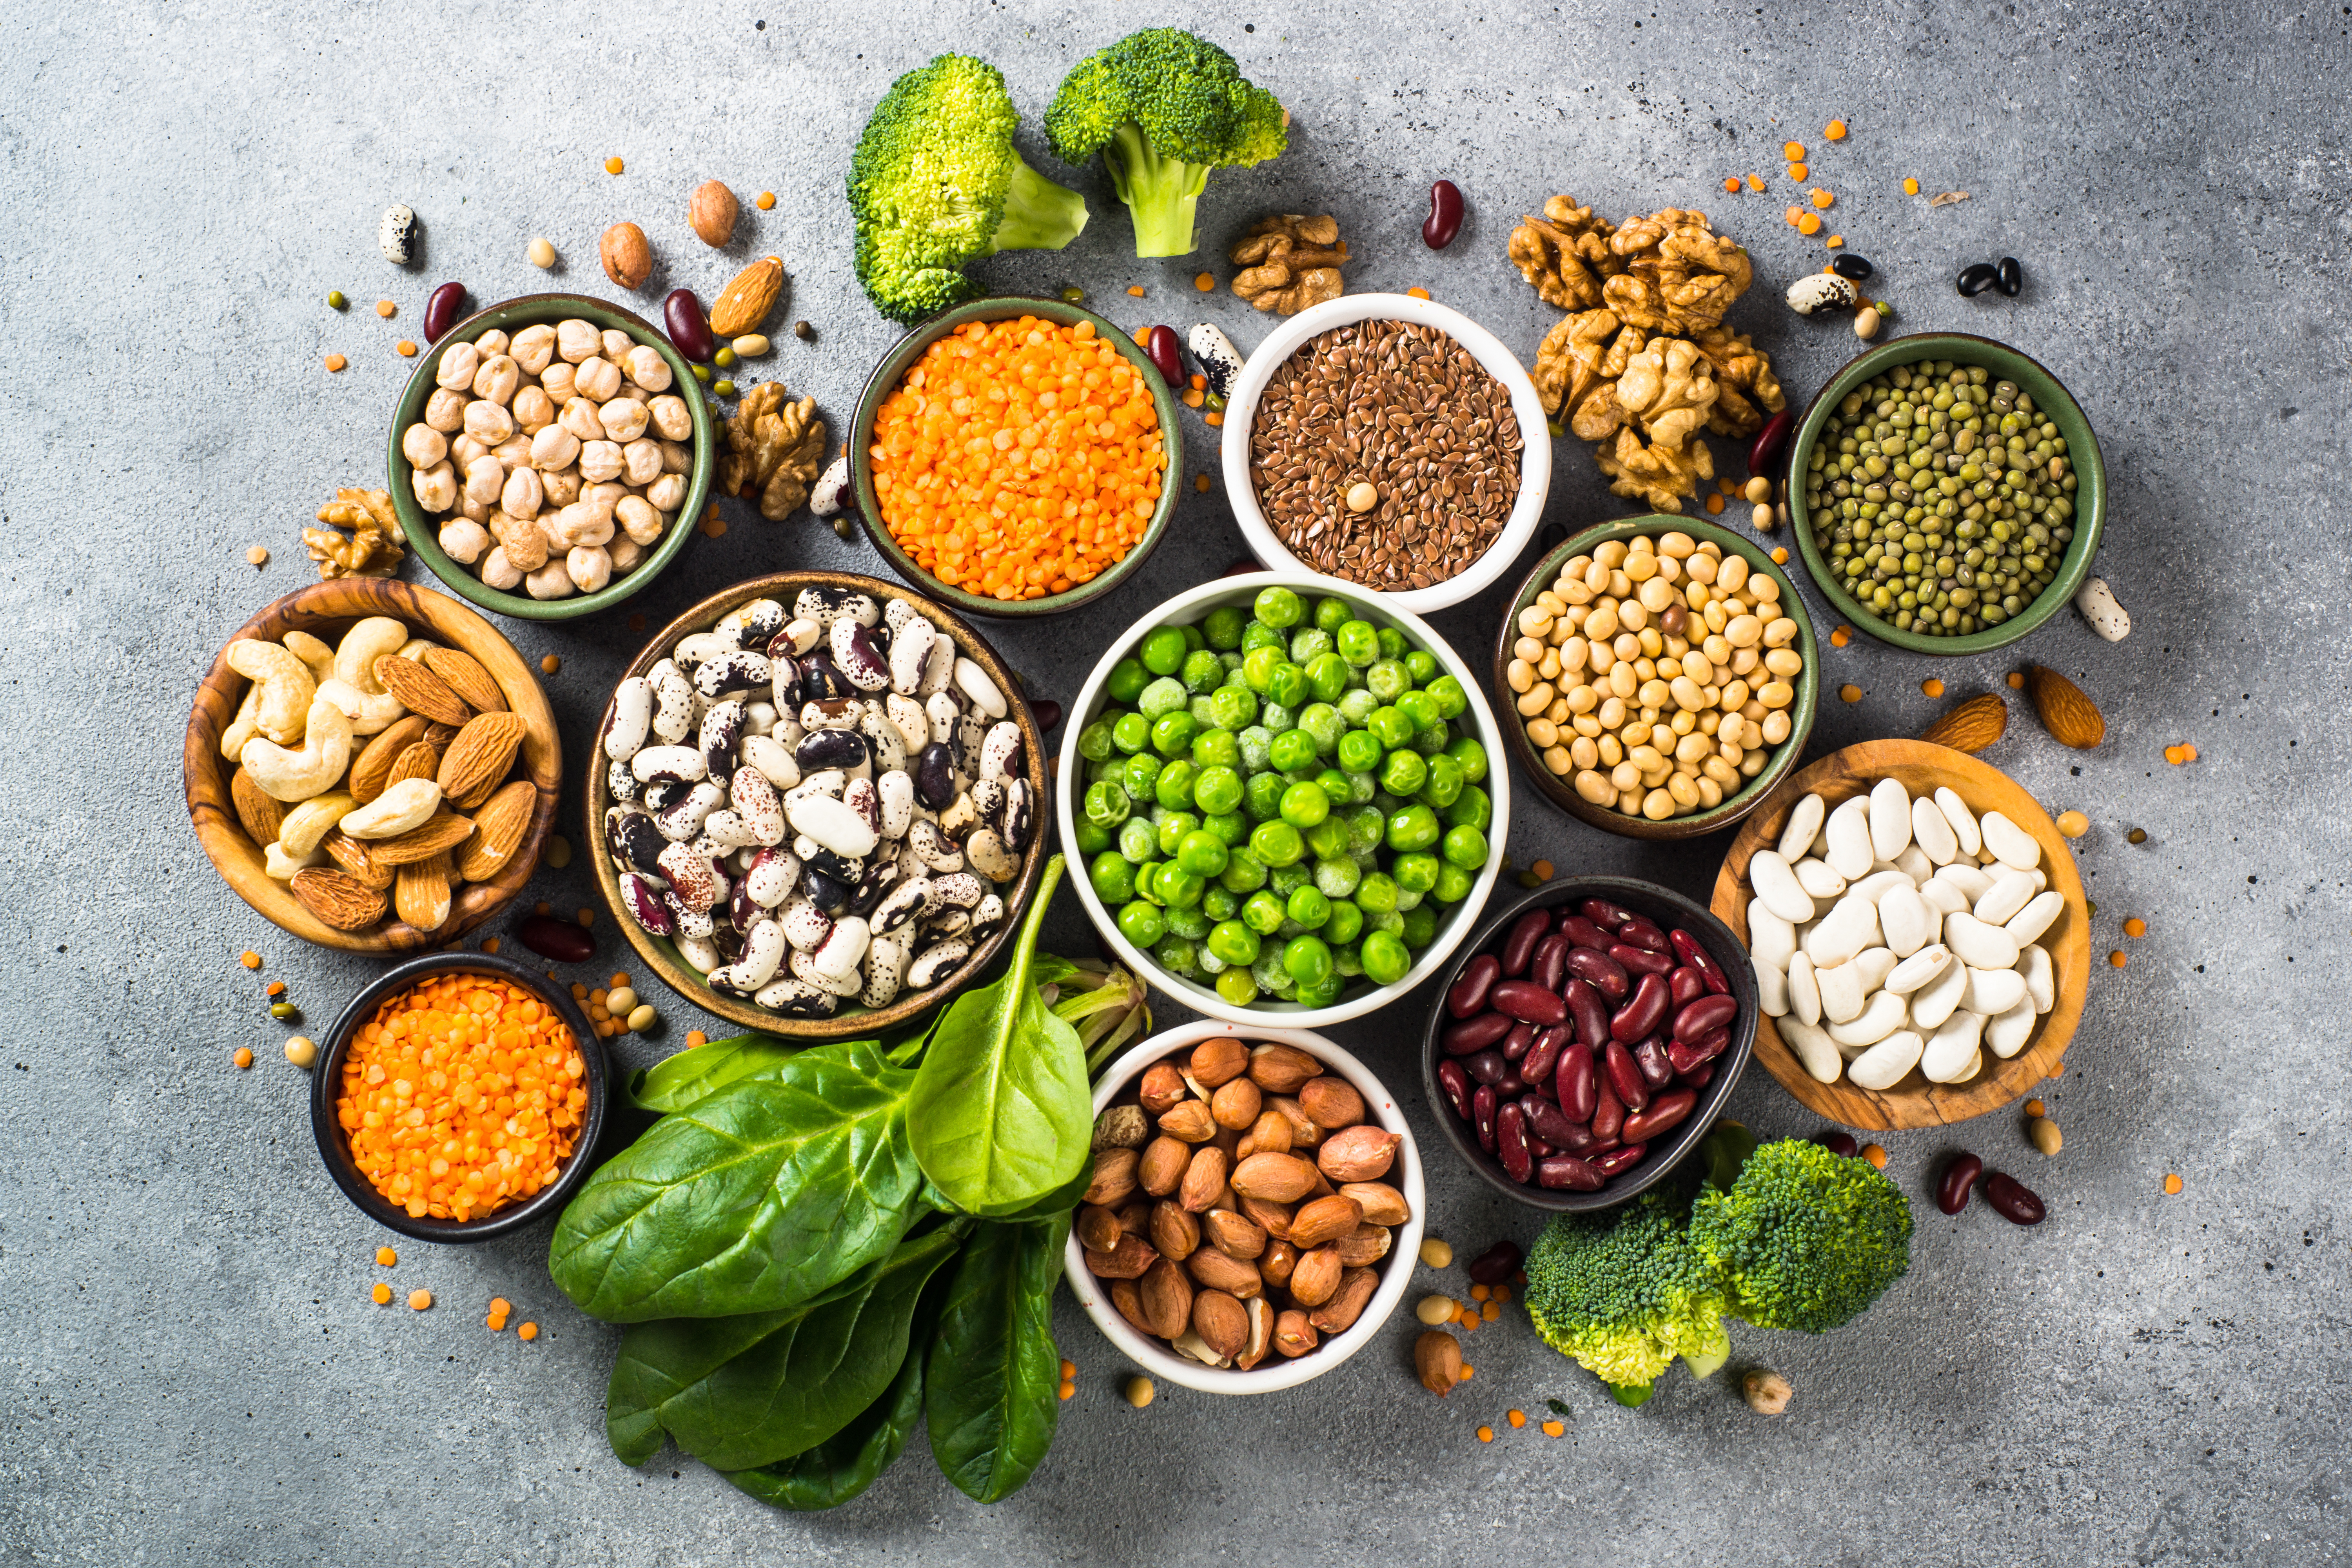 Plant-based proteins